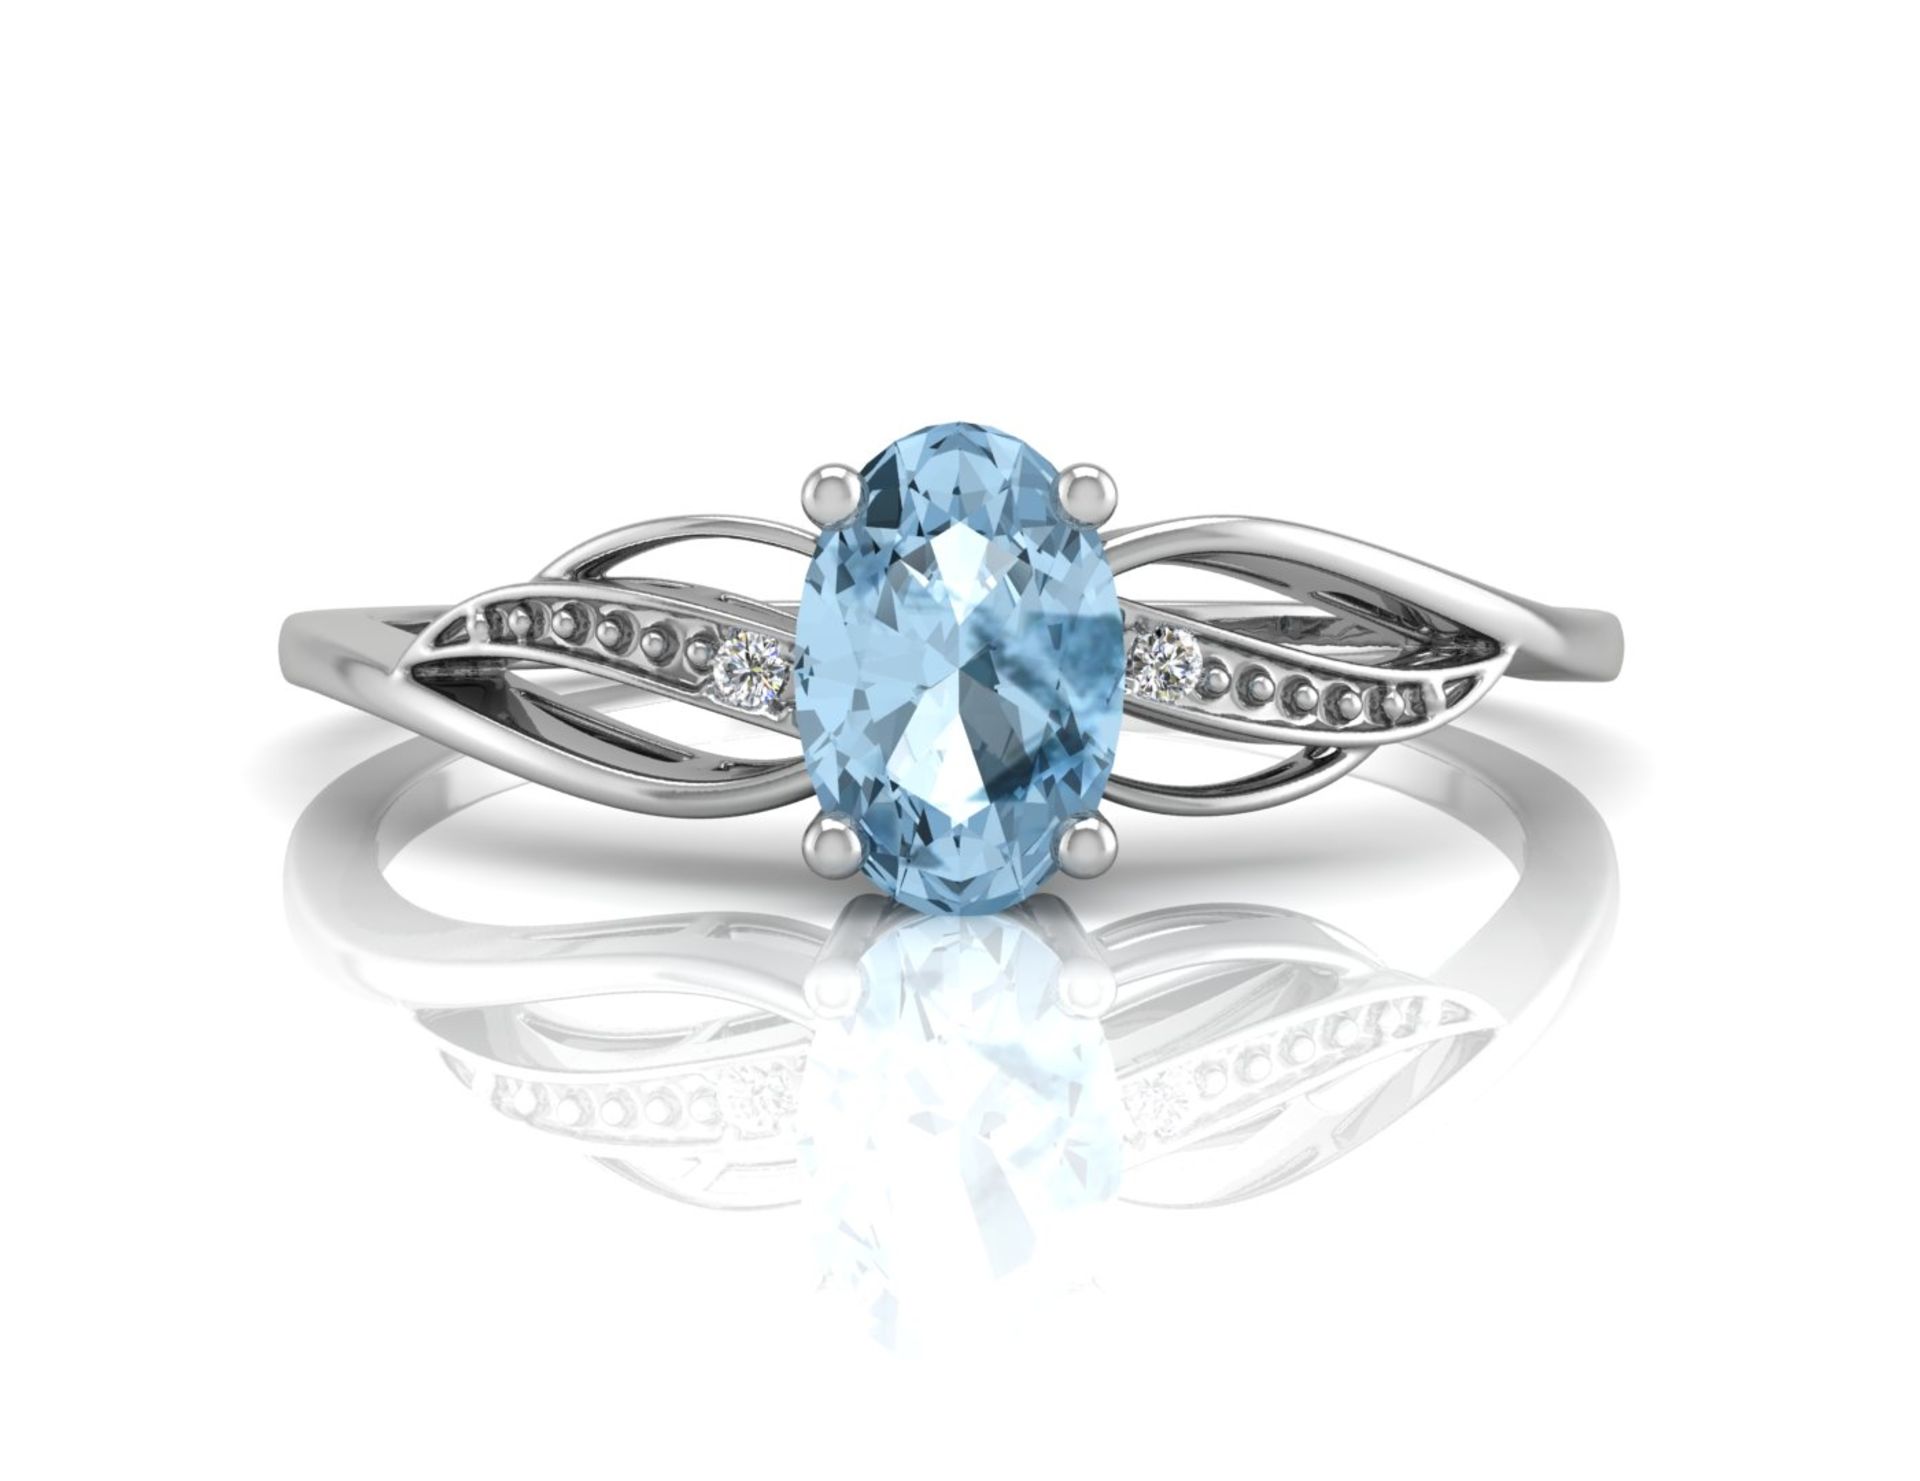 9ct White Gold Diamond And Oval Shape Blue Topaz Twist Ring 0.01 Carats - Valued by GIE £950.00 - - Image 4 of 5